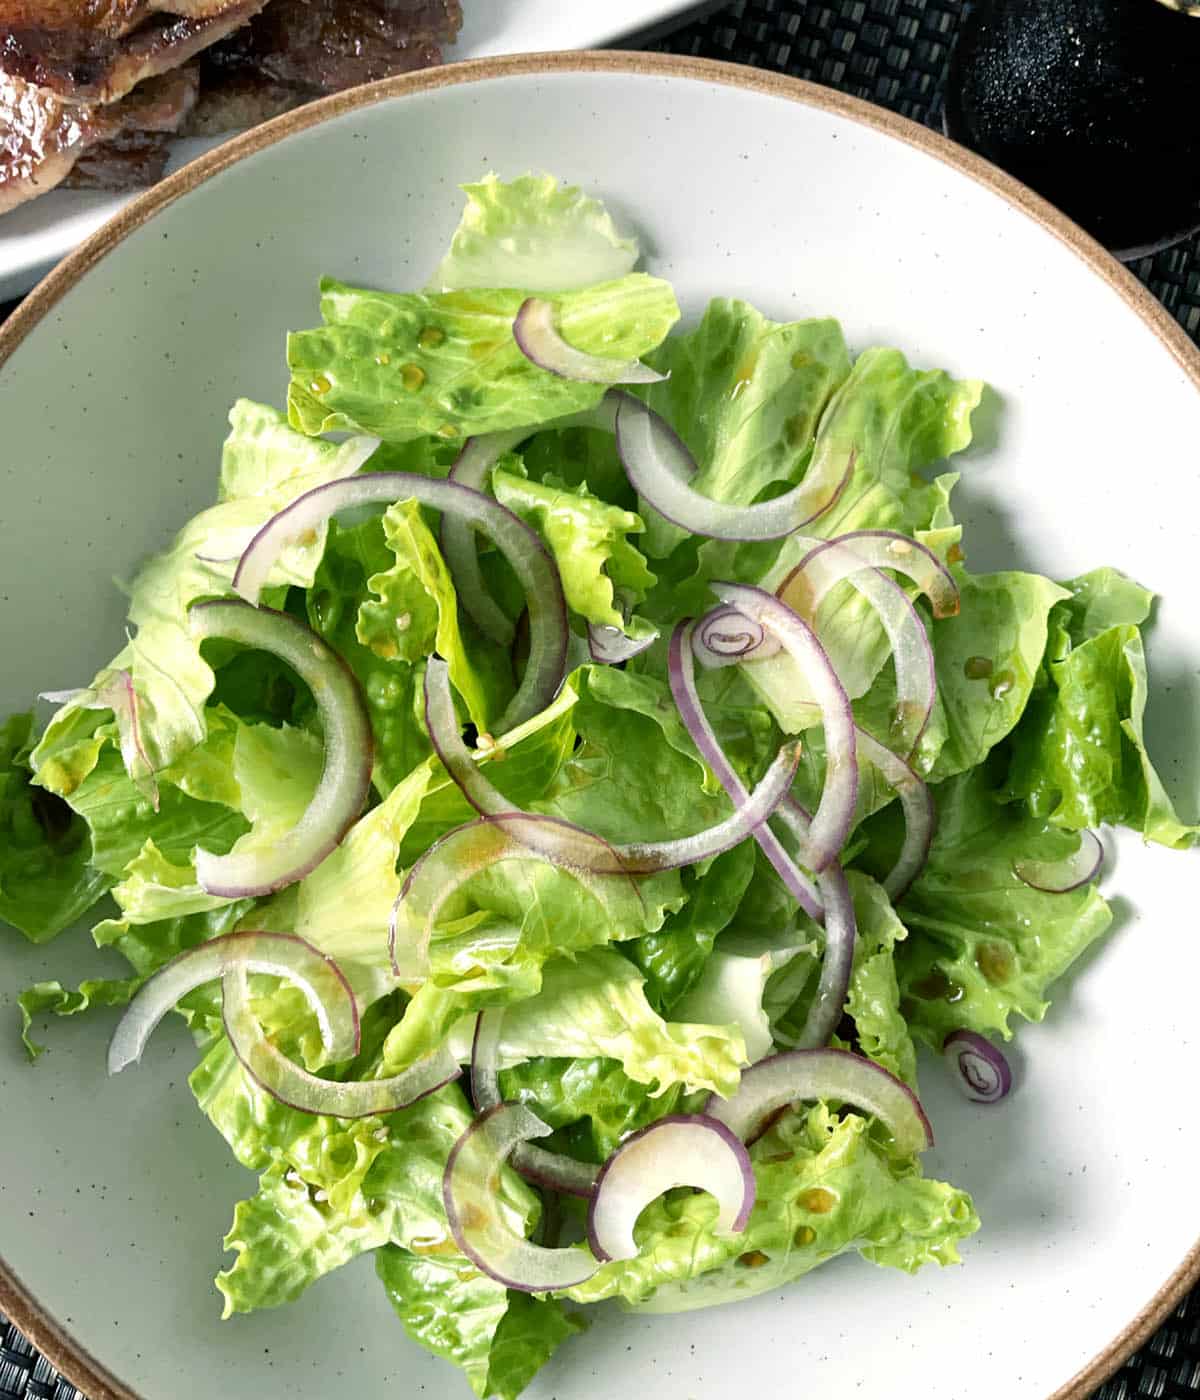 A round dish containing Korean lettuce salad with thinly sliced red onions and brown dressing.